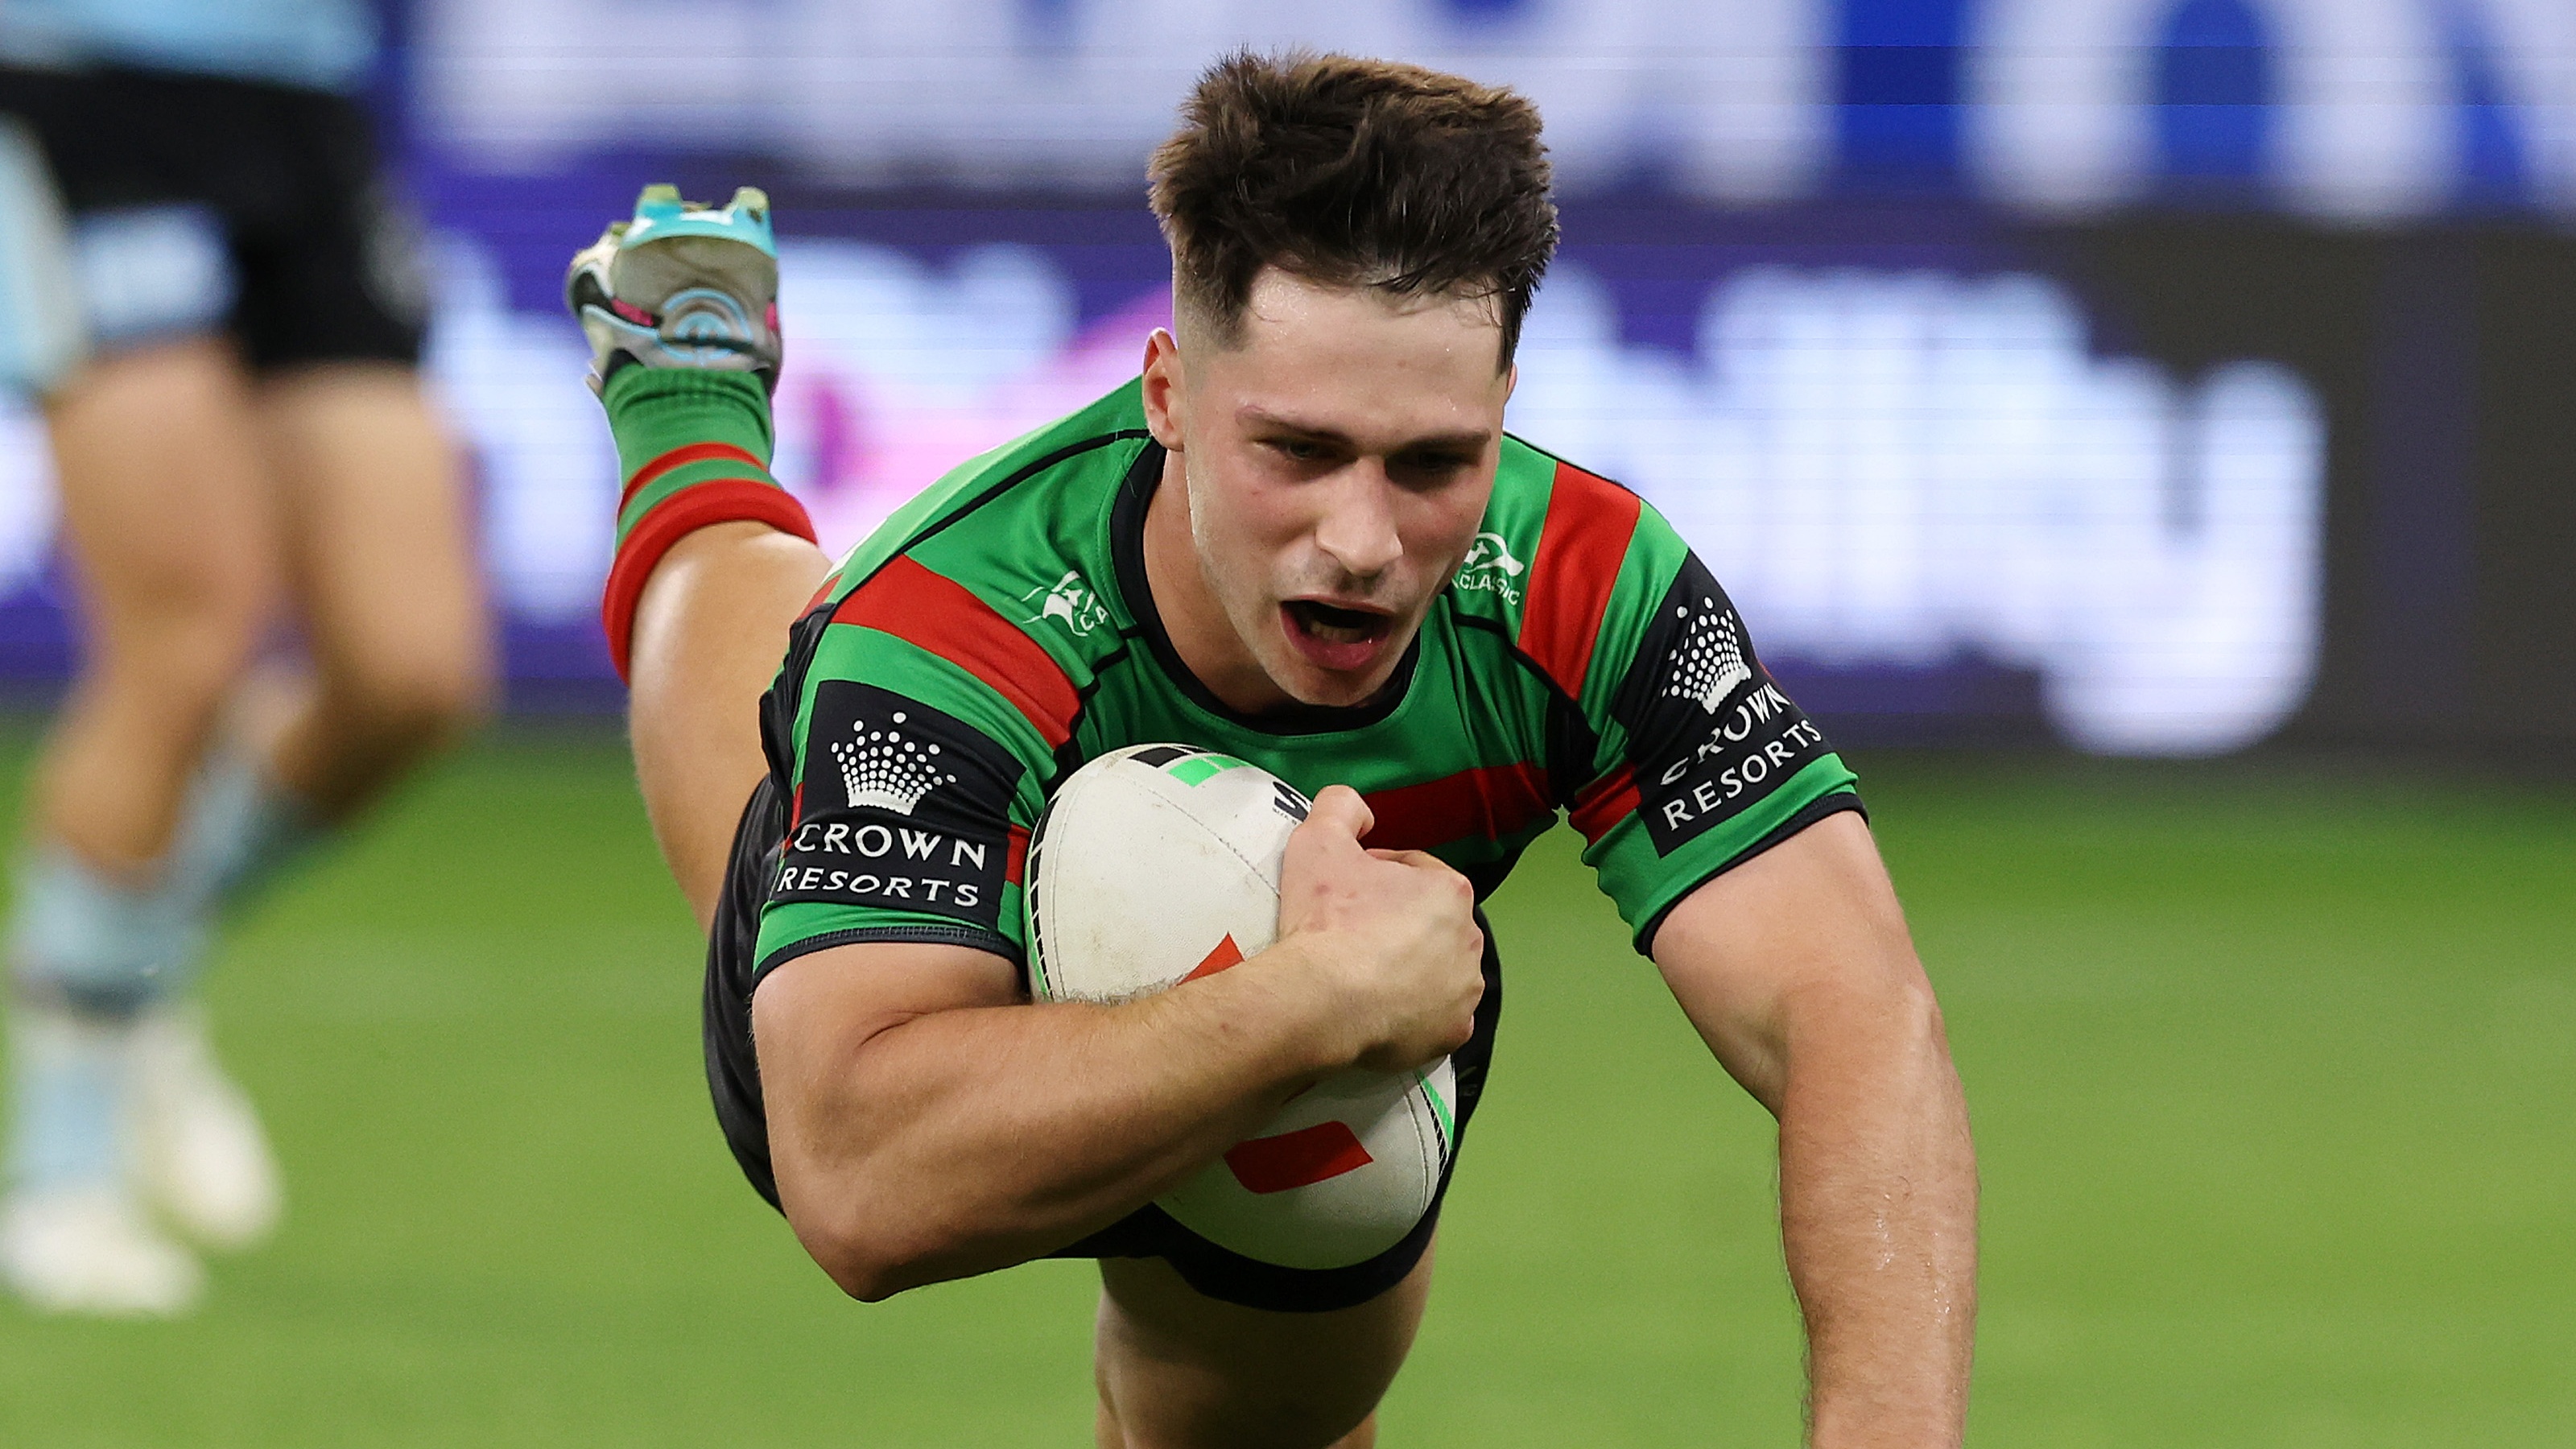 Rabbitohs vs Roosters live stream How to watch NRL free online today